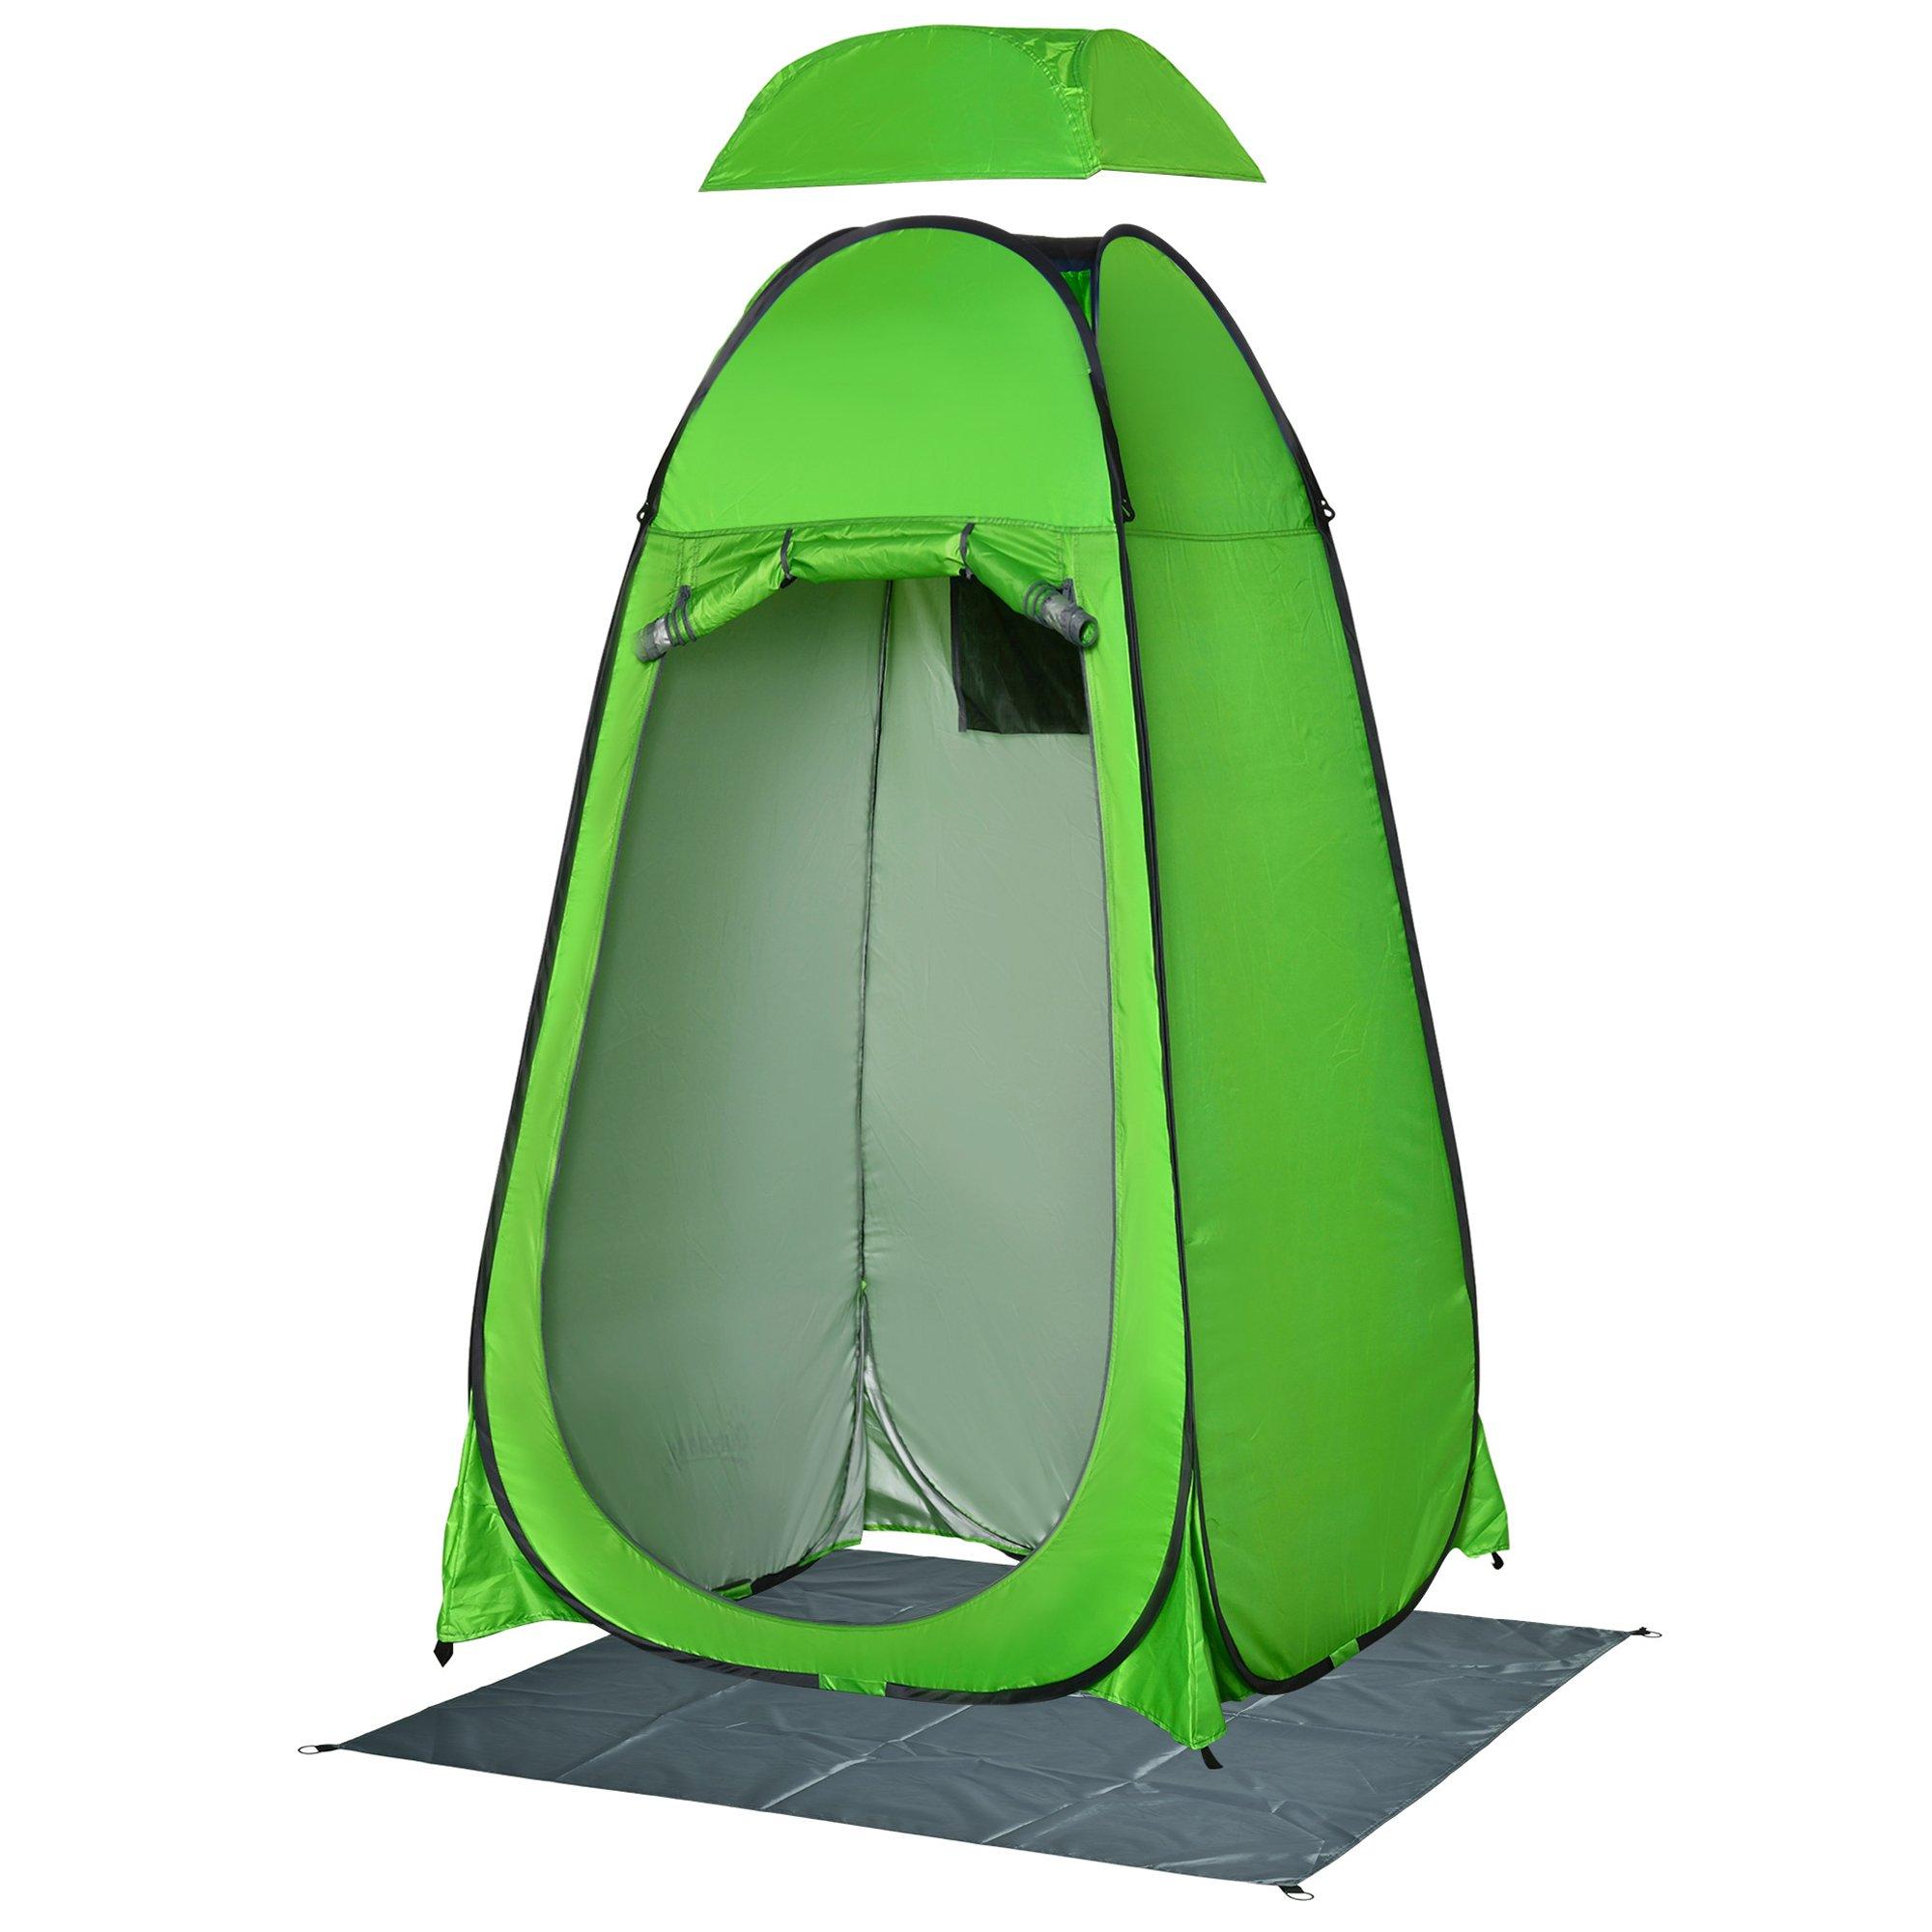 Camping Shower Tent w/ Pop Up Design, Outdoor Dressing Changing Room